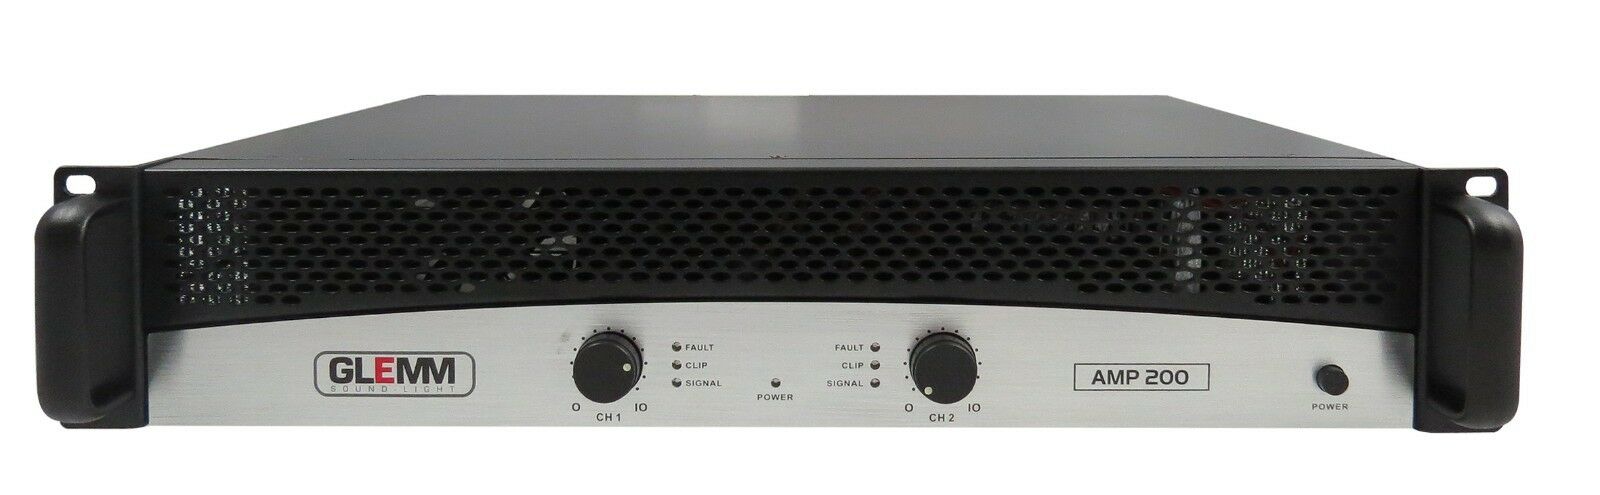 Amp 200 Stereo Amplifier 2 X 200w